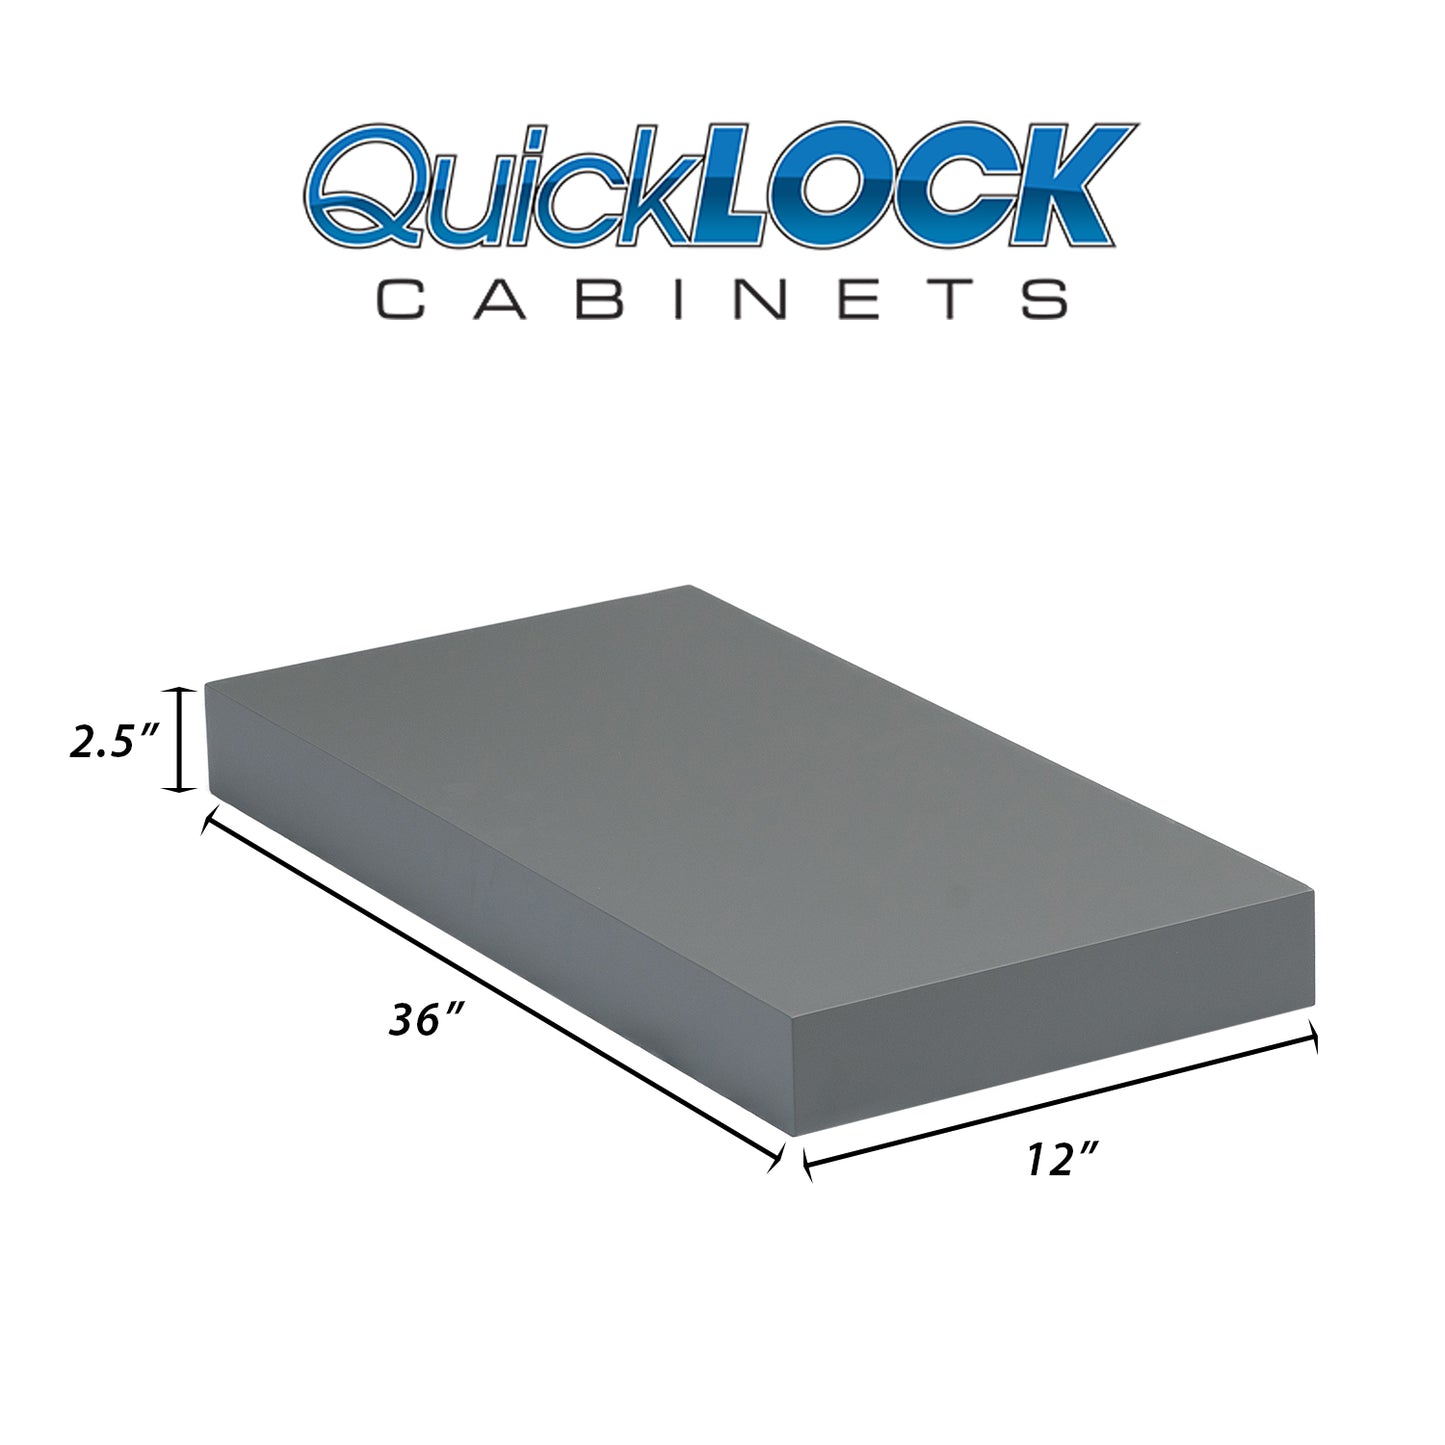 Quicklock Cabinets Floating Shelves | 2.5" Thick | Magnetic Gray, 12" D x 36" W x 2.5" H | American Made | Hardwood Bracket | Complete Shelf Unit